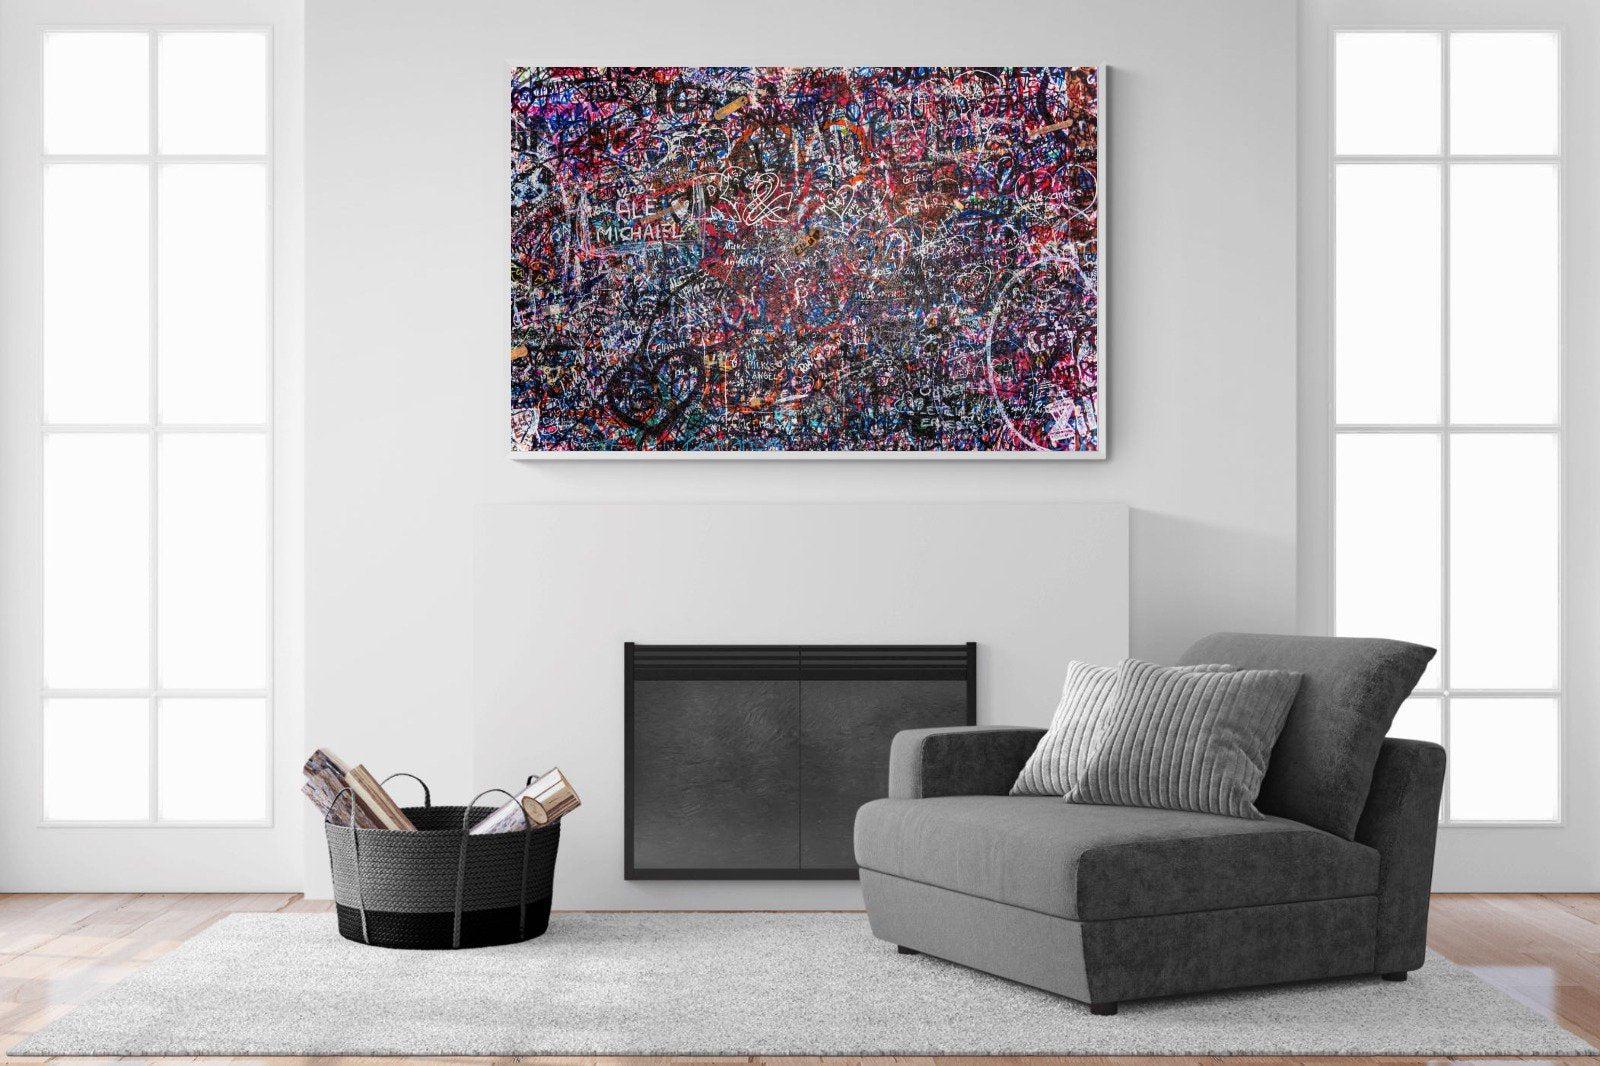 Lover's Wall-Wall_Art-150 x 100cm-Mounted Canvas-White-Pixalot